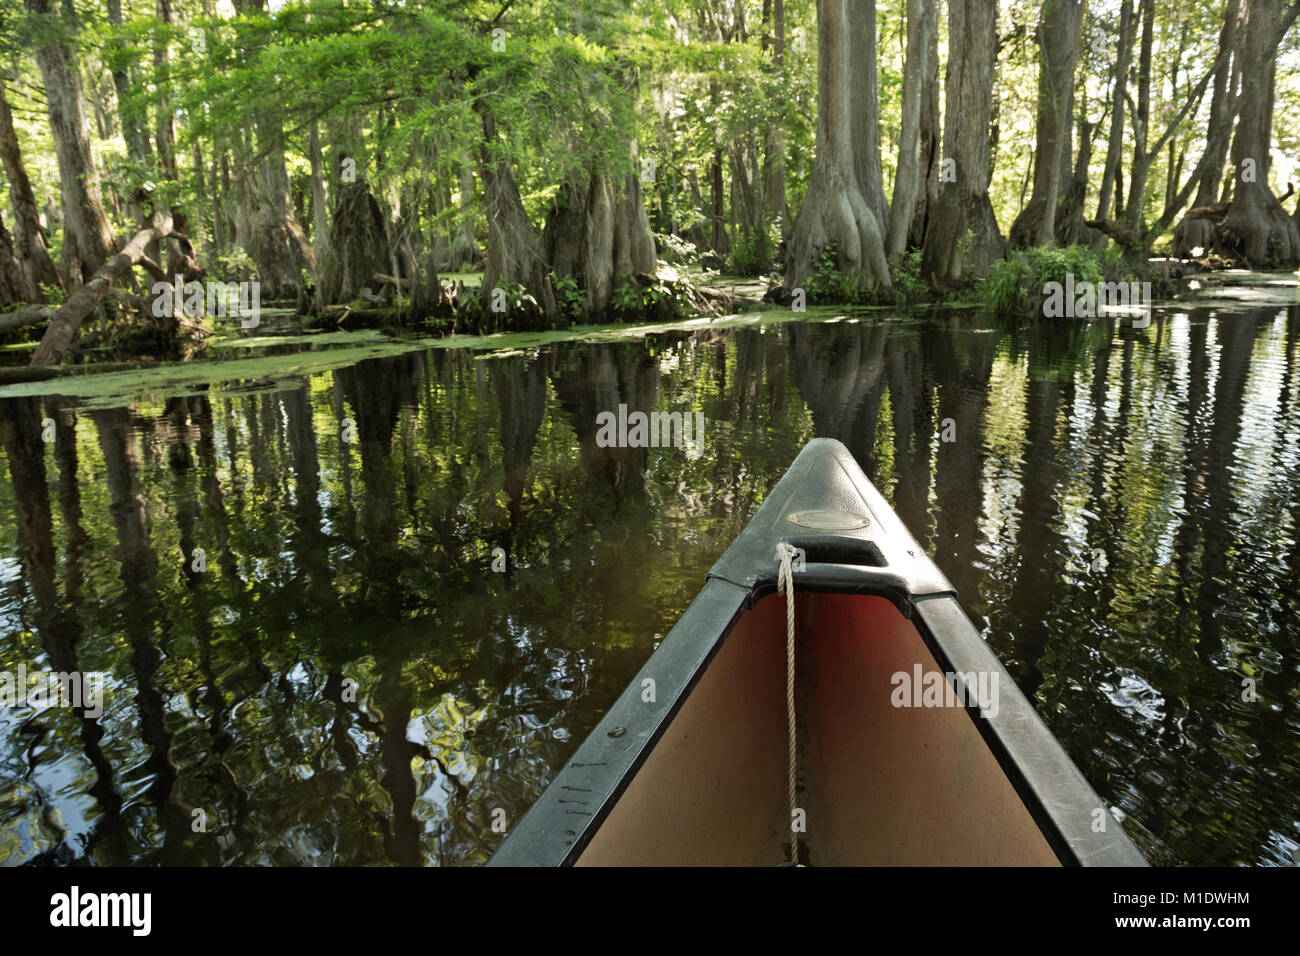 NC01493-00...NORTH CAROLINA - A canoe traveling through the cypress swamp in Merchant Millpond; Merchant Millpond State Park. Stock Photo